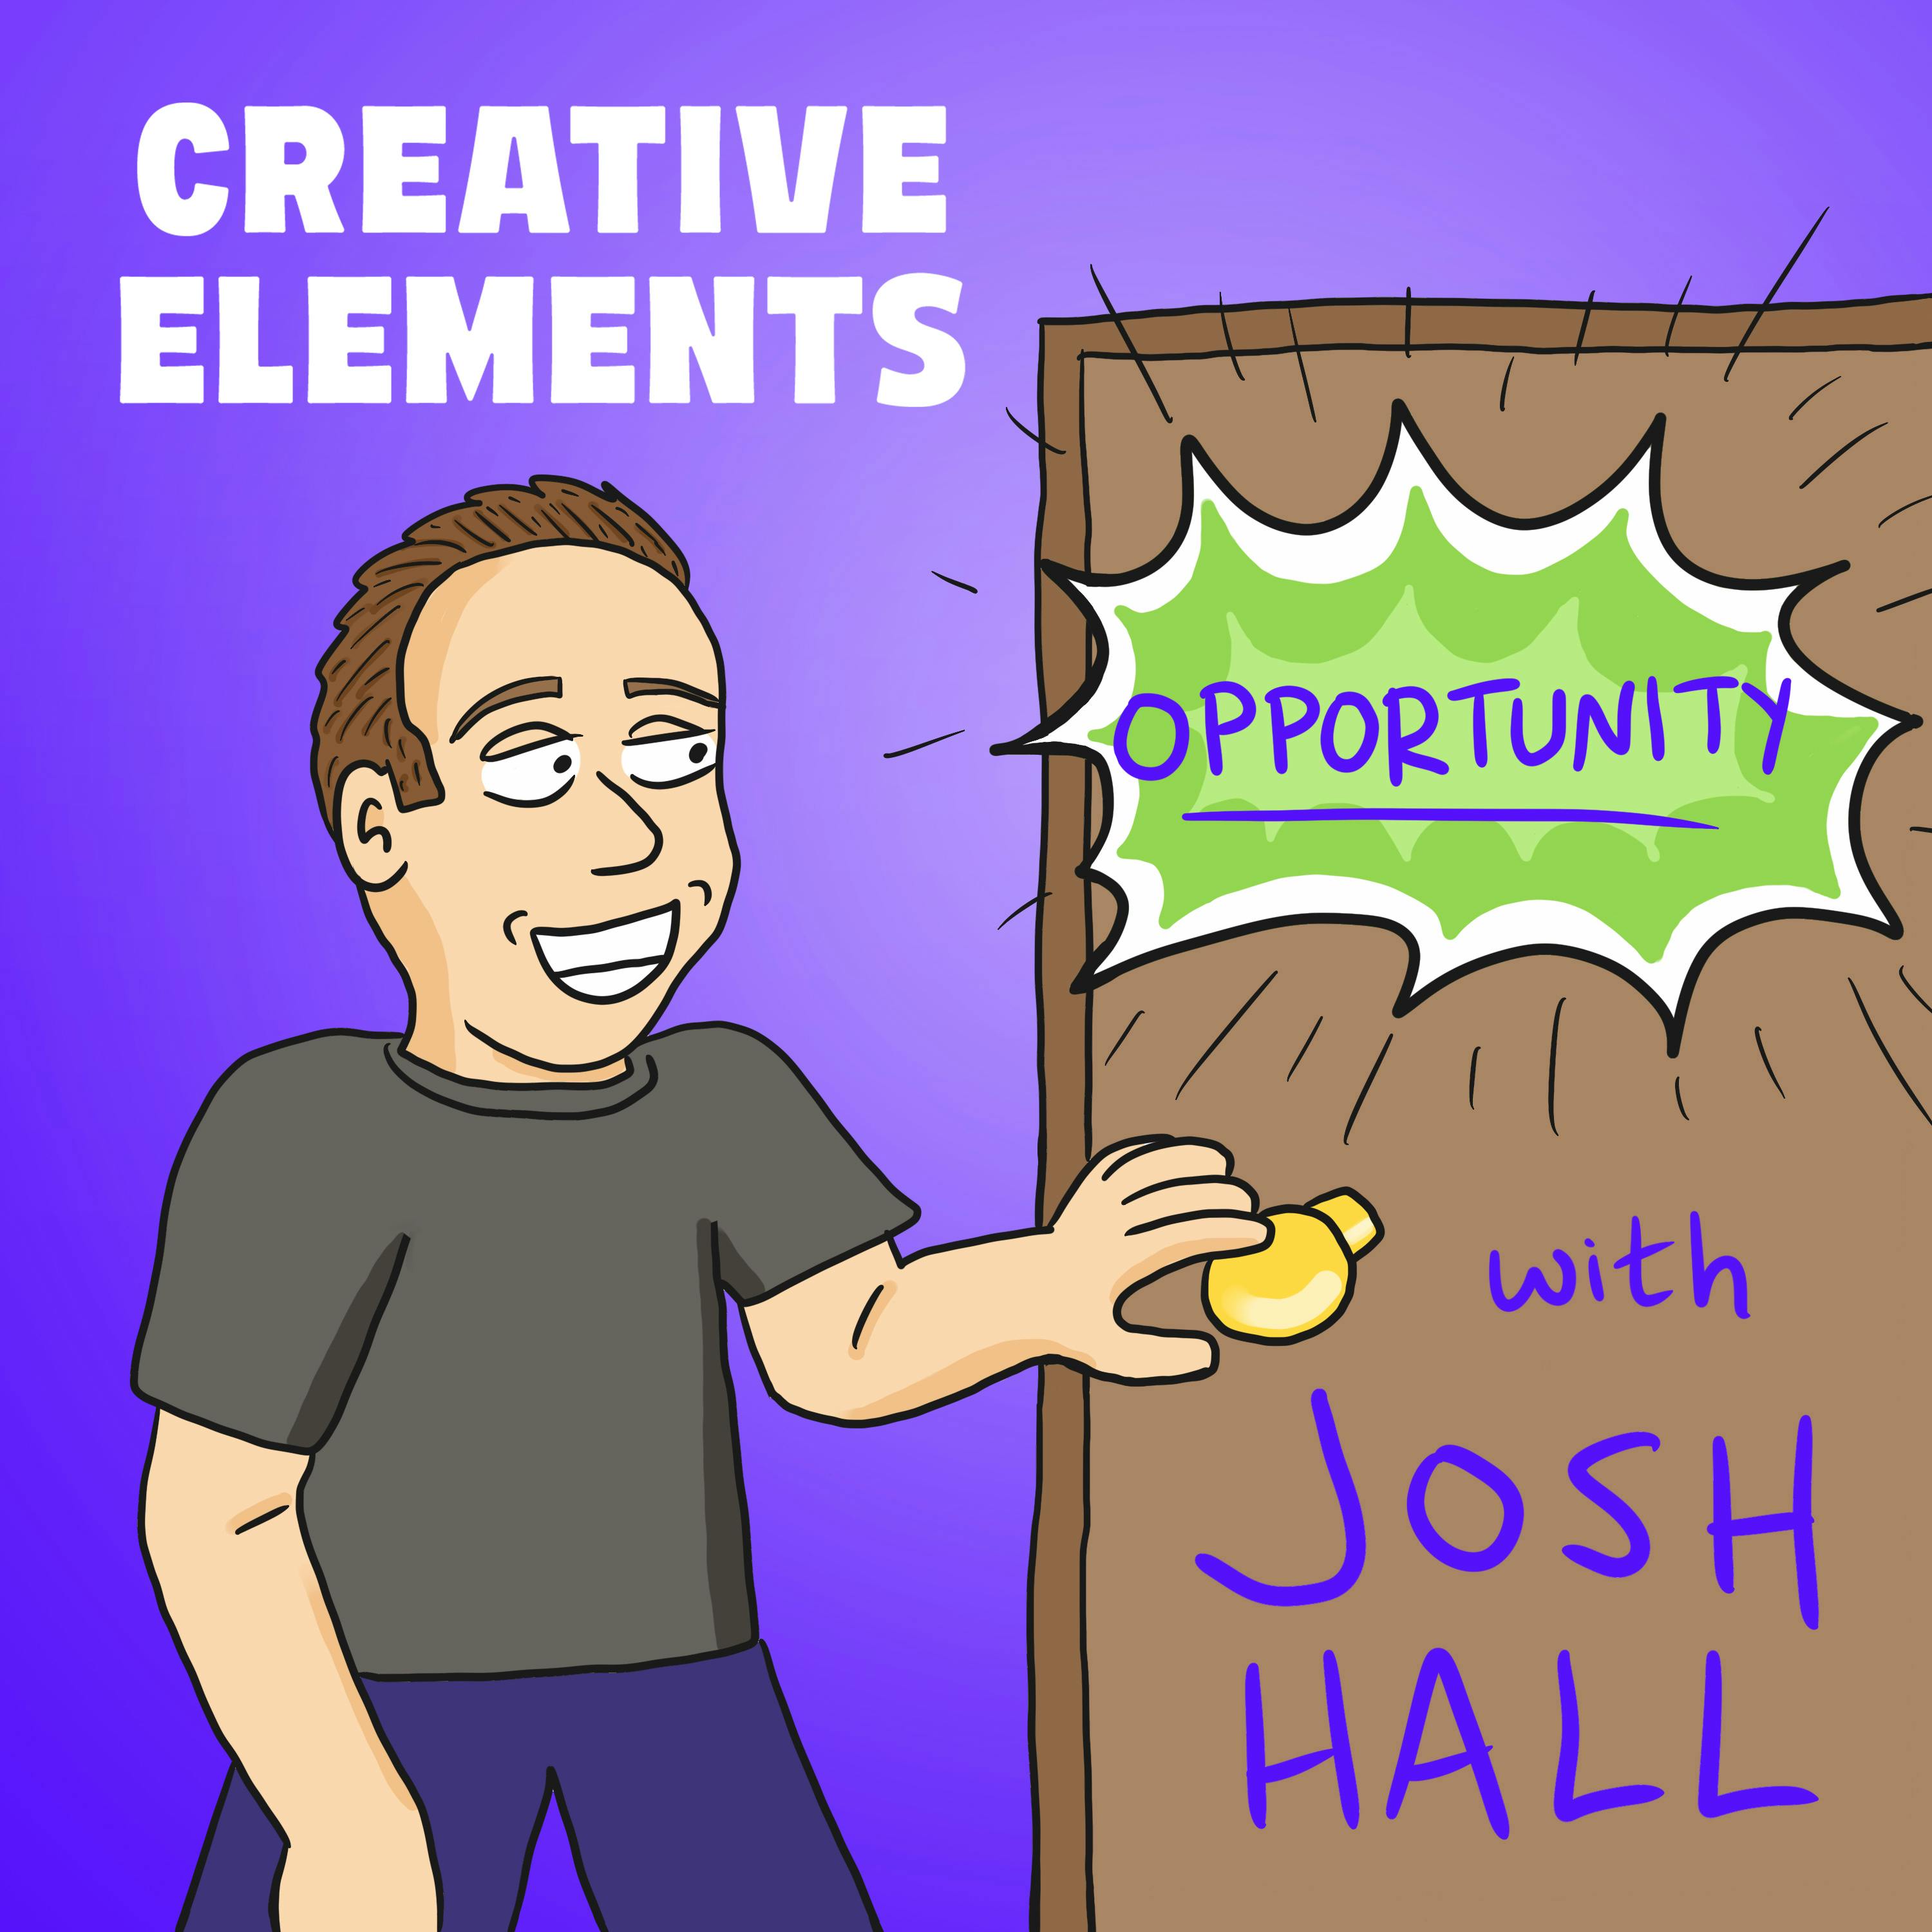 #95: Josh Hall [Opportunity] – from freelance web design to professional creator earning $300K/year Image